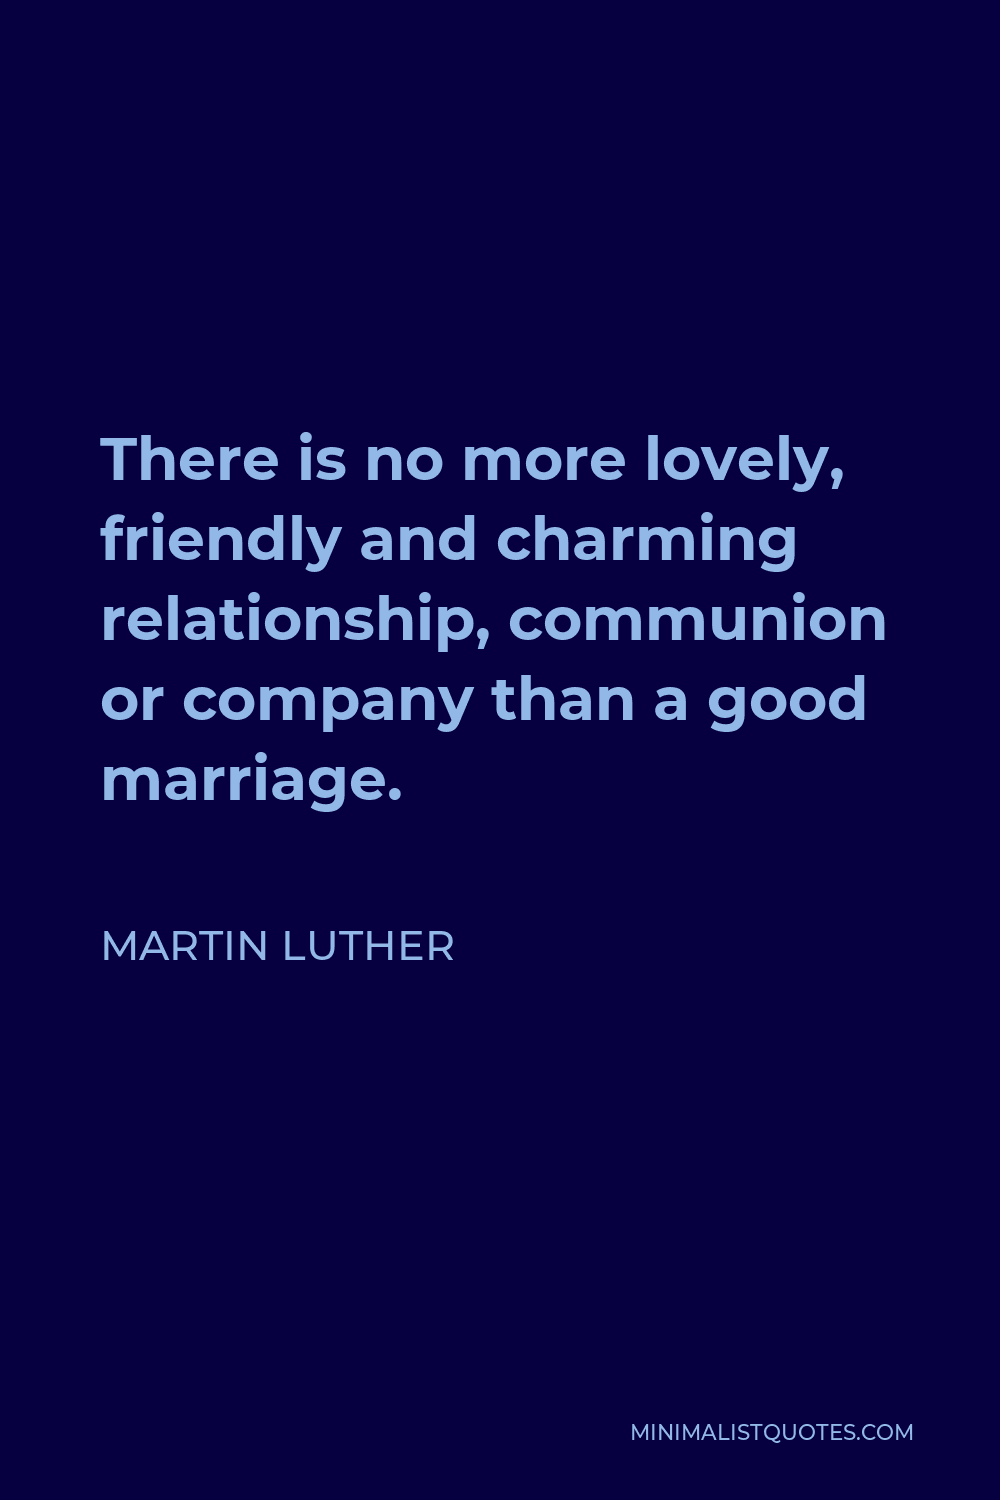 Martin Luther Quote - There is no more lovely, friendly and charming relationship, communion or company than a good marriage.